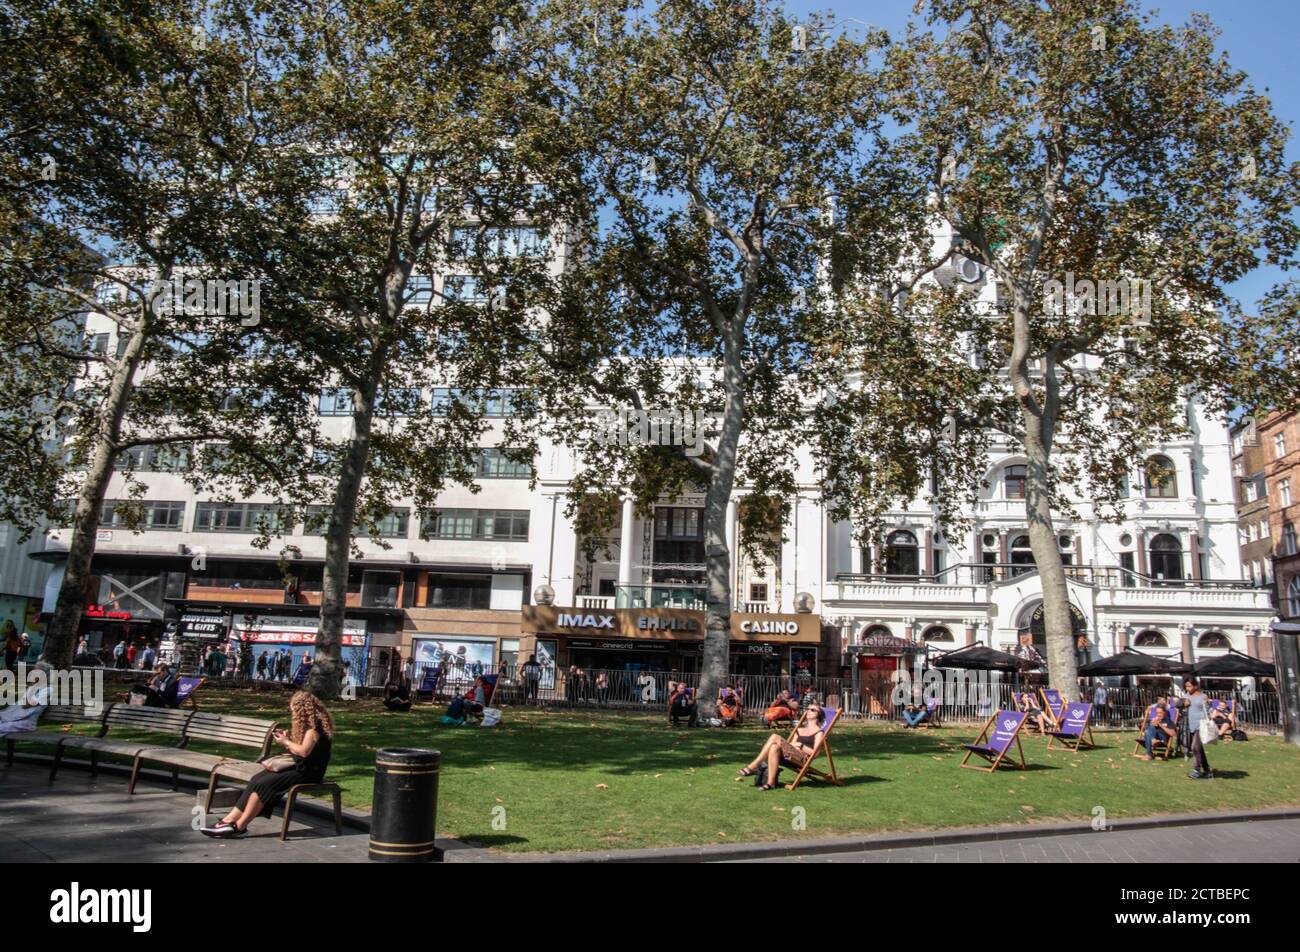 London UK 22 September 2020 Londoners enjoying the last day of warm sunshine in the capital ,before the temperatures take dip ,according to the Met office .Paul Quezada-Neiman/Alamy Live News Stock Photo